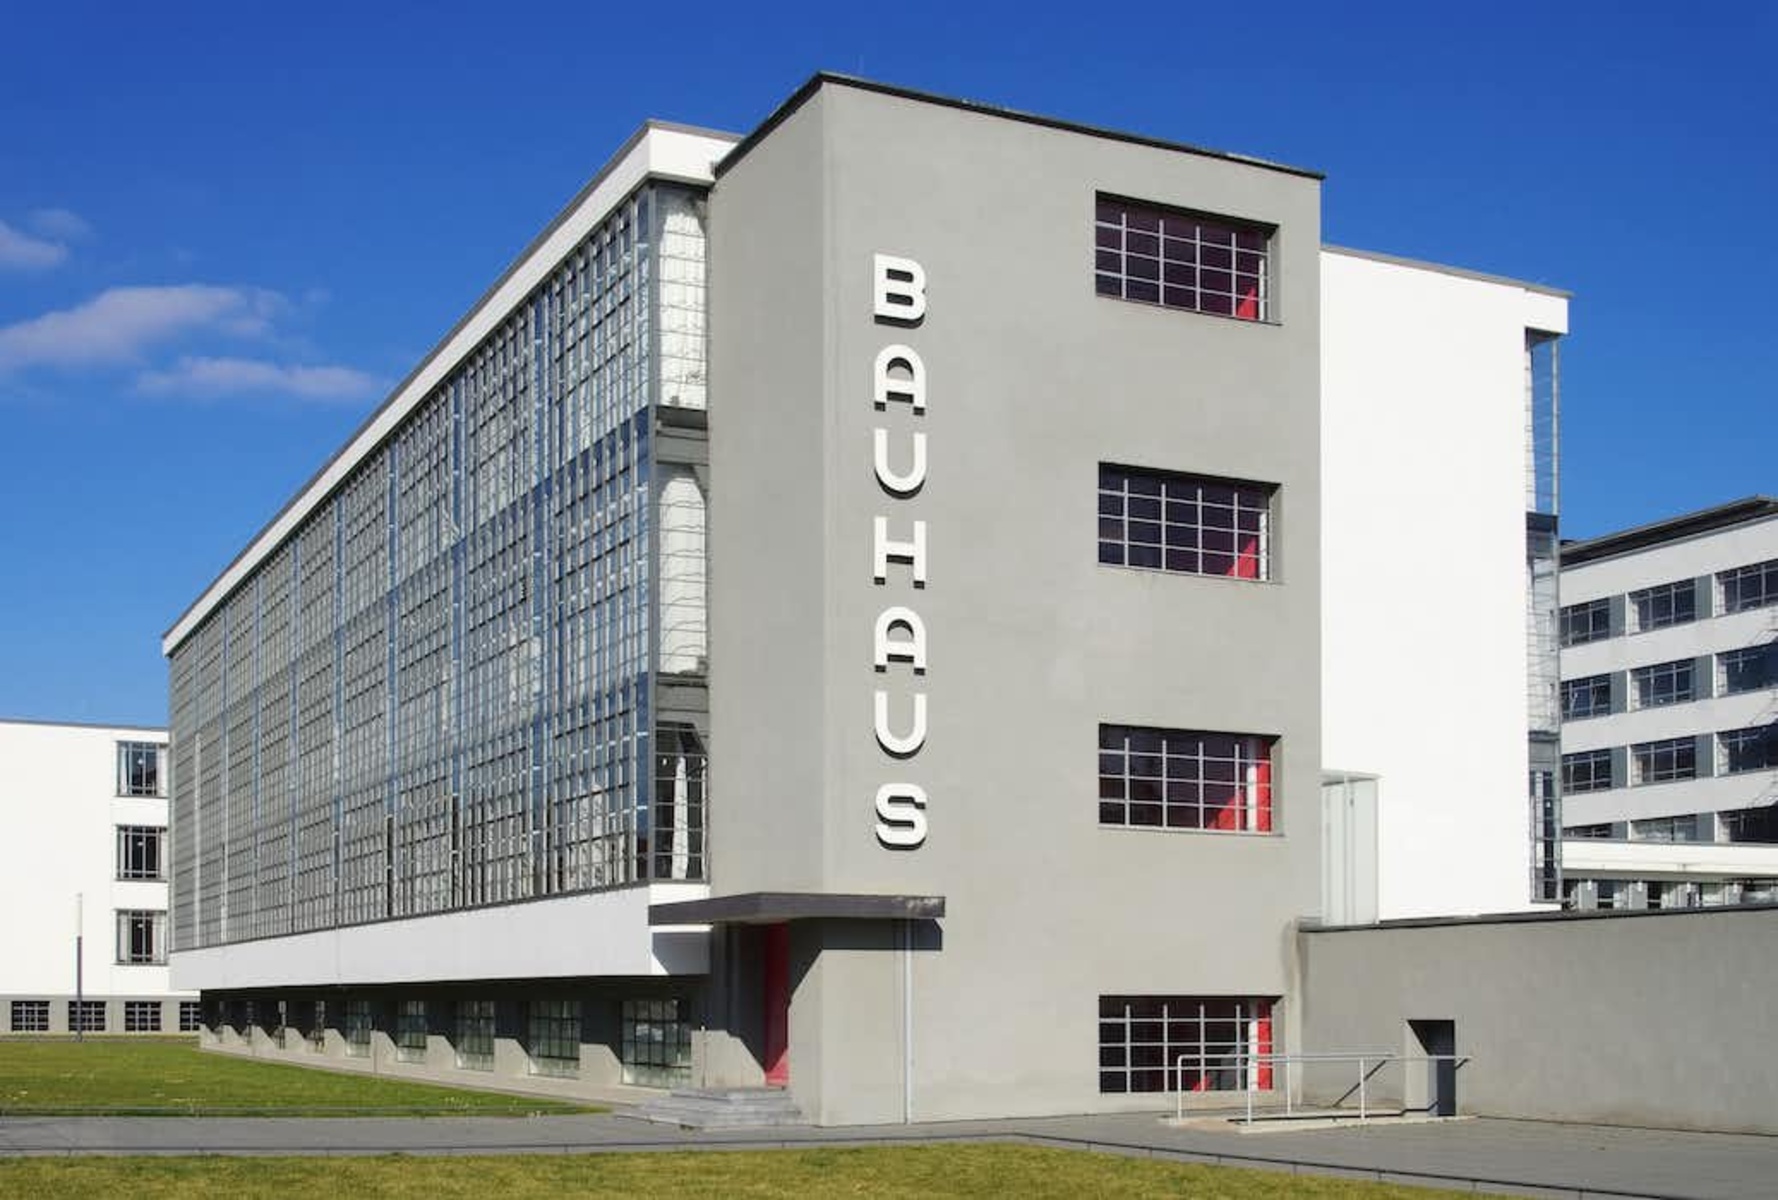 18-facts-about-dessau-masters-of-modernism-tour